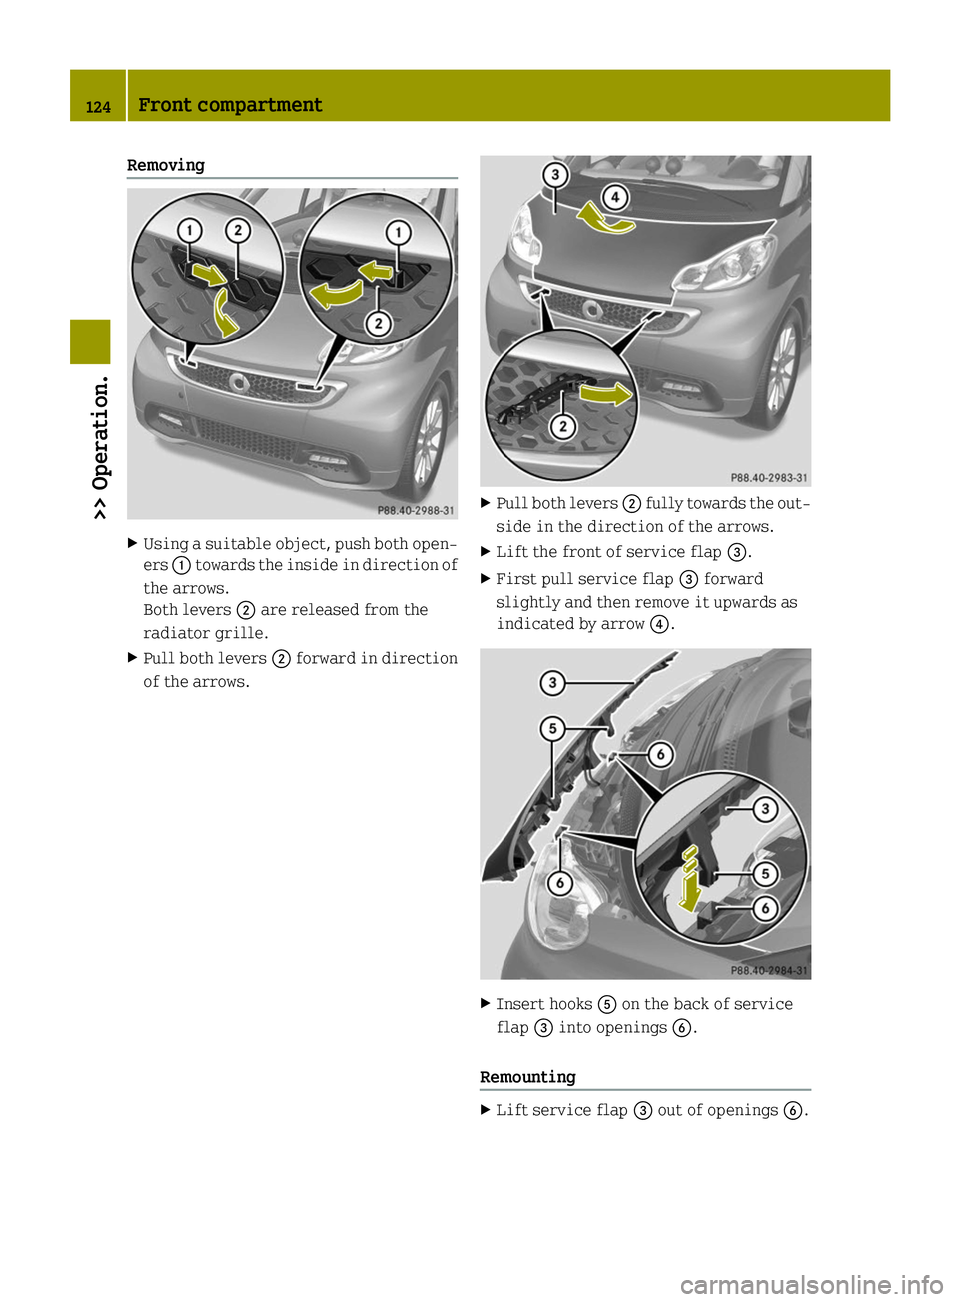 SMART FORTWO COUPE ELECTRIC DRIVE 2014 Owners Guide Removing
X
Using a suitable object, push both open-
ers 0043towards the inside in direction of
the arrows.
Both levers 0044are released from the
radiator grille.
X Pull both levers 0044forward in dire